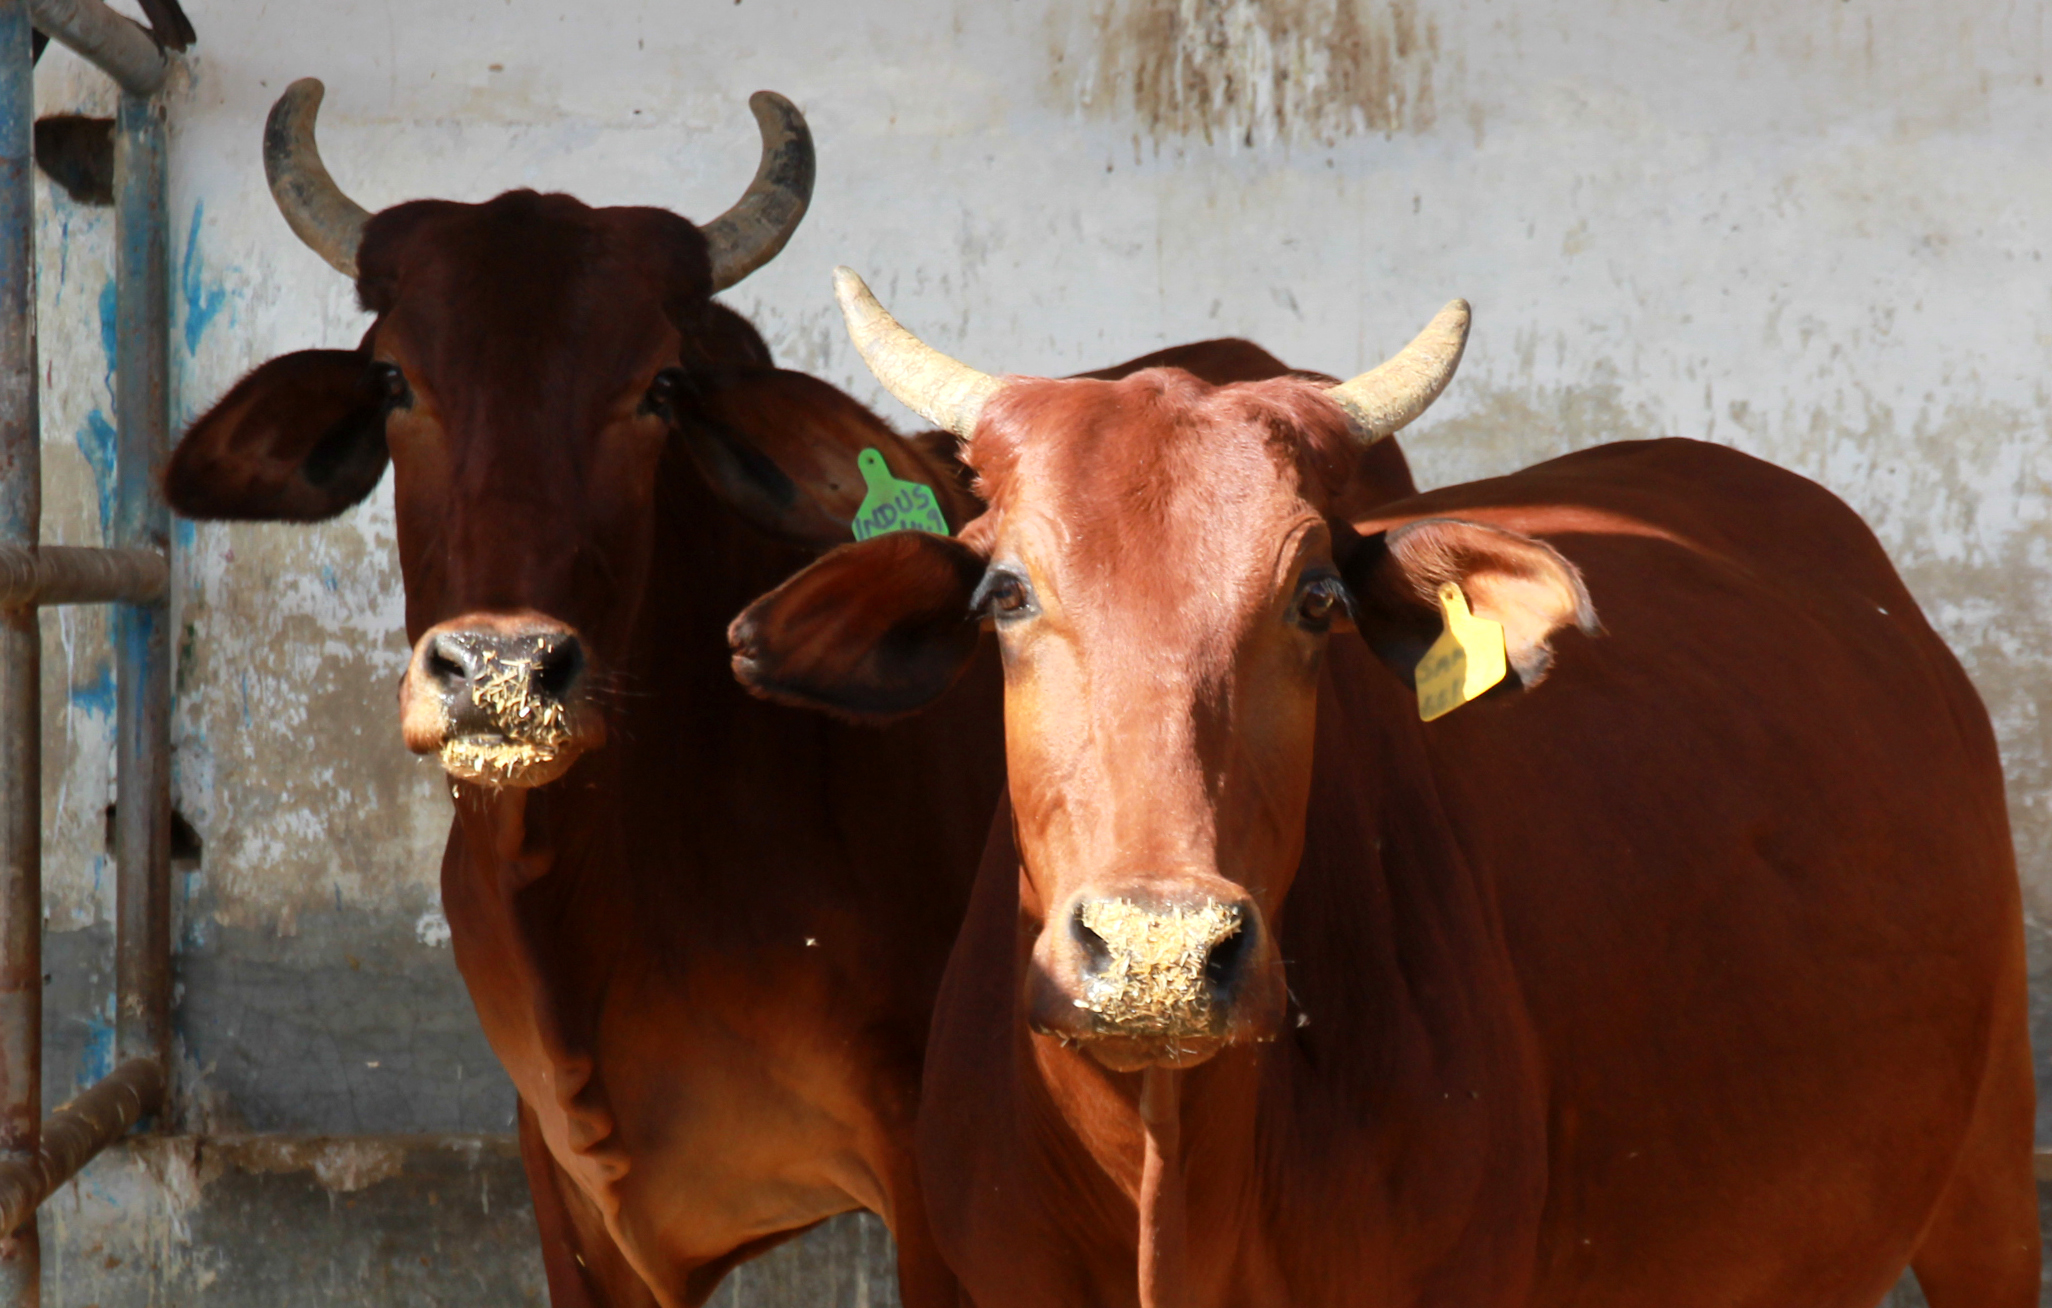 'Red Sindhi' cattle have a medium-sized build, compact body and a deep reddish-brown skin. PHOTO: ATHAR KHAN/ EXPRESS